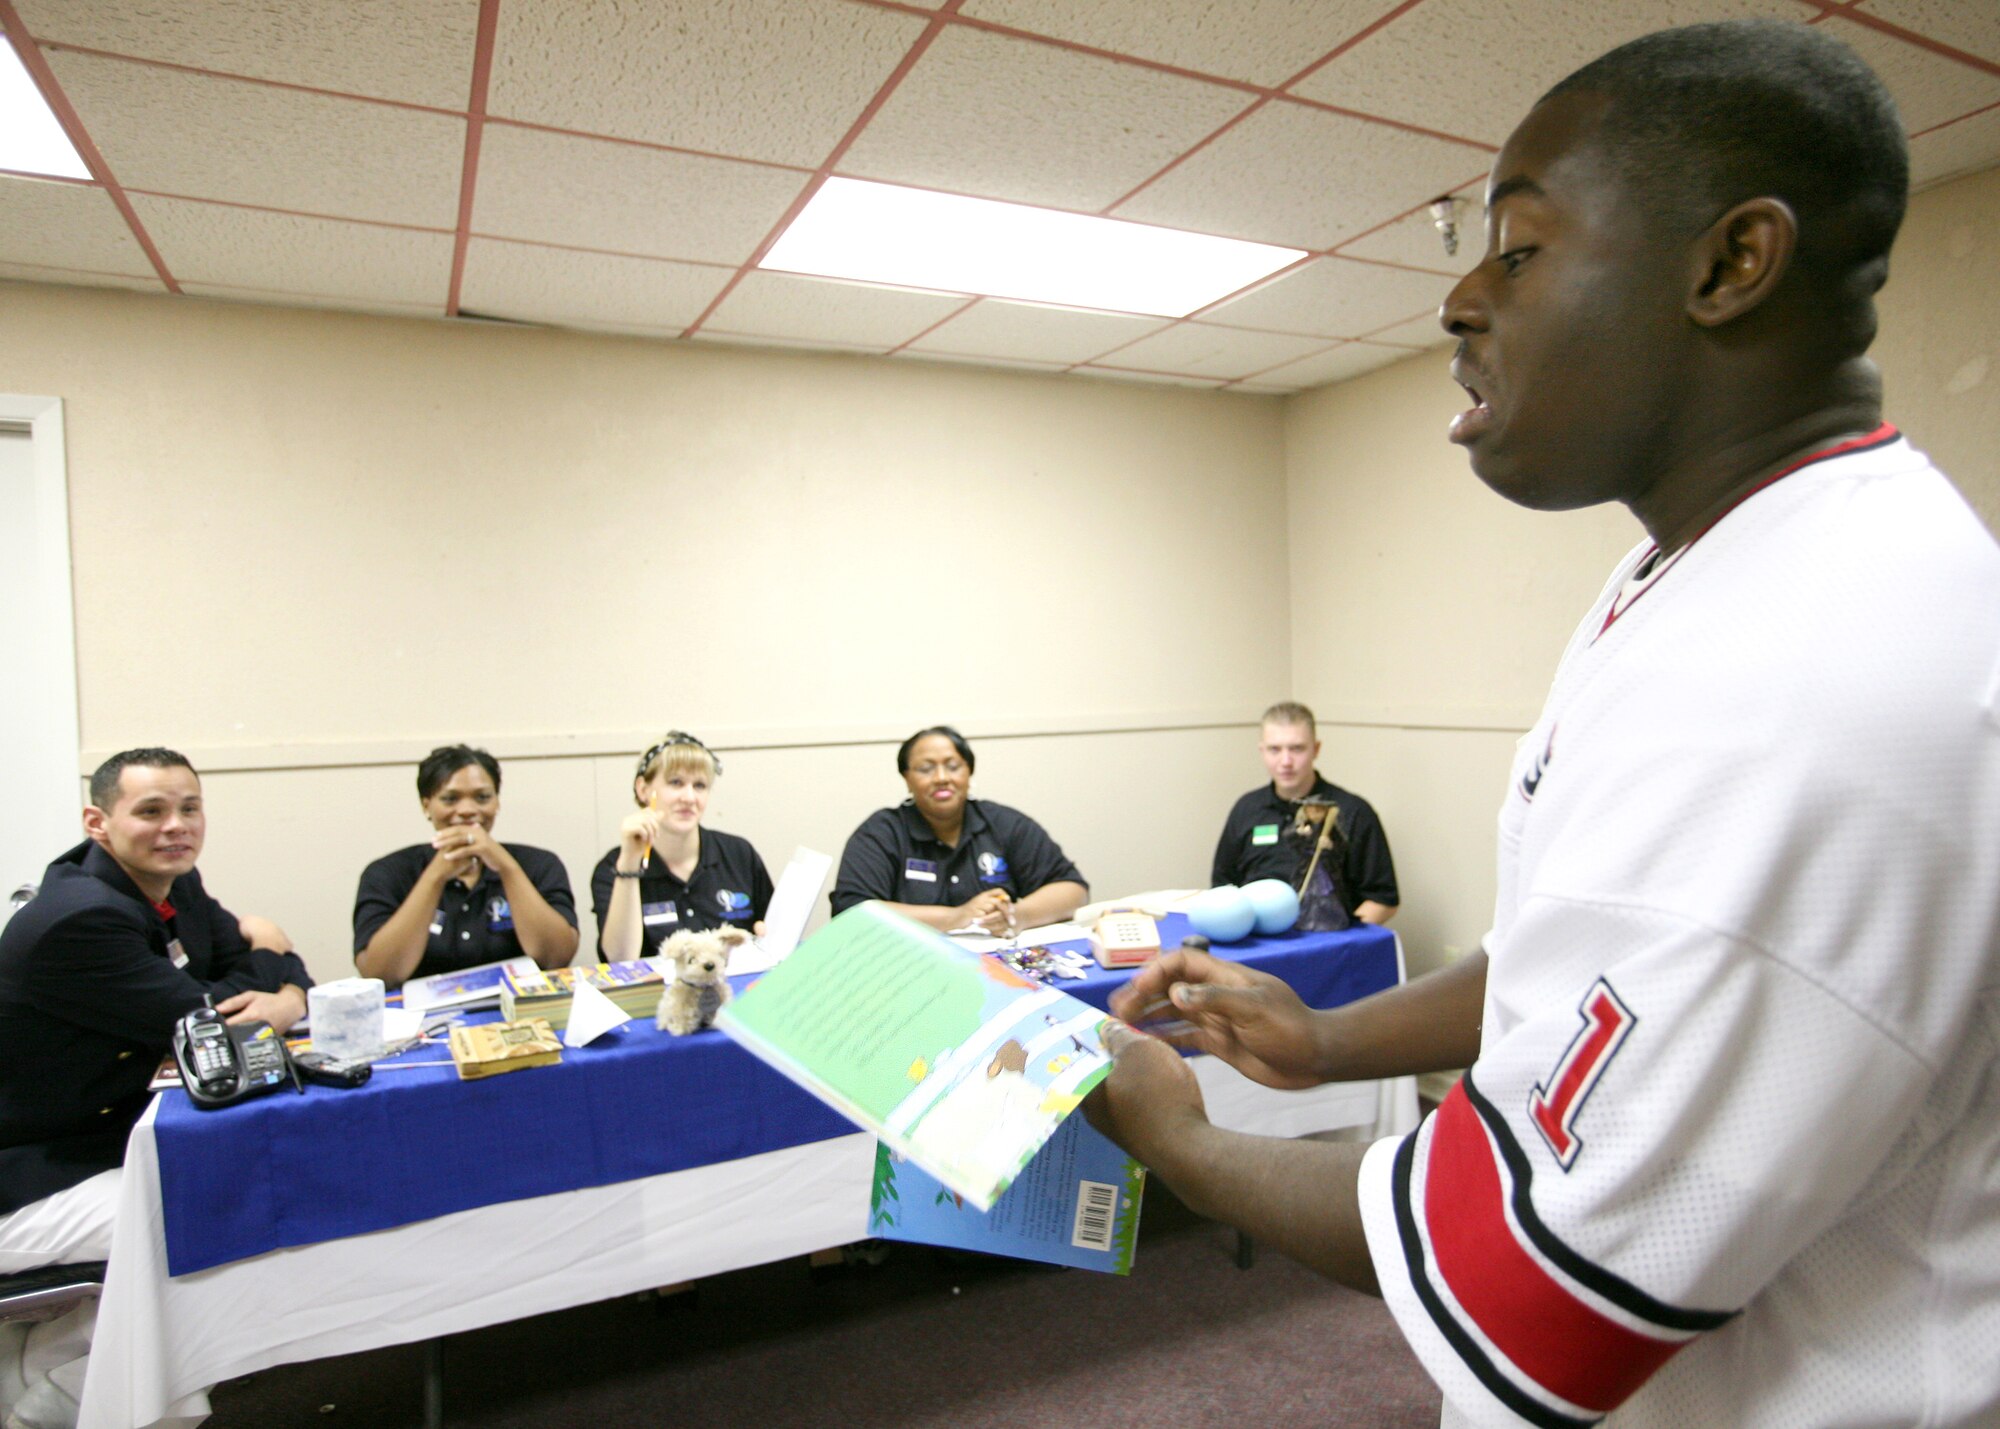 In a Bill Cosby impression, Senor Airman Jonathan Allen reads from a children's book to a panel during the Air Force World Wide Talent Contest at Lackland Air Force Base, Texas. Airman Allen, from F. E. Warren Air Force Base, Wyo., is a trumpet player and is competing for a spot on the 2008 Tops in Blue team. The competition, held Dec. 2-10, is the first step to Tops in Blue.  (U.S. Air Force photo/Robbin Cresswell)